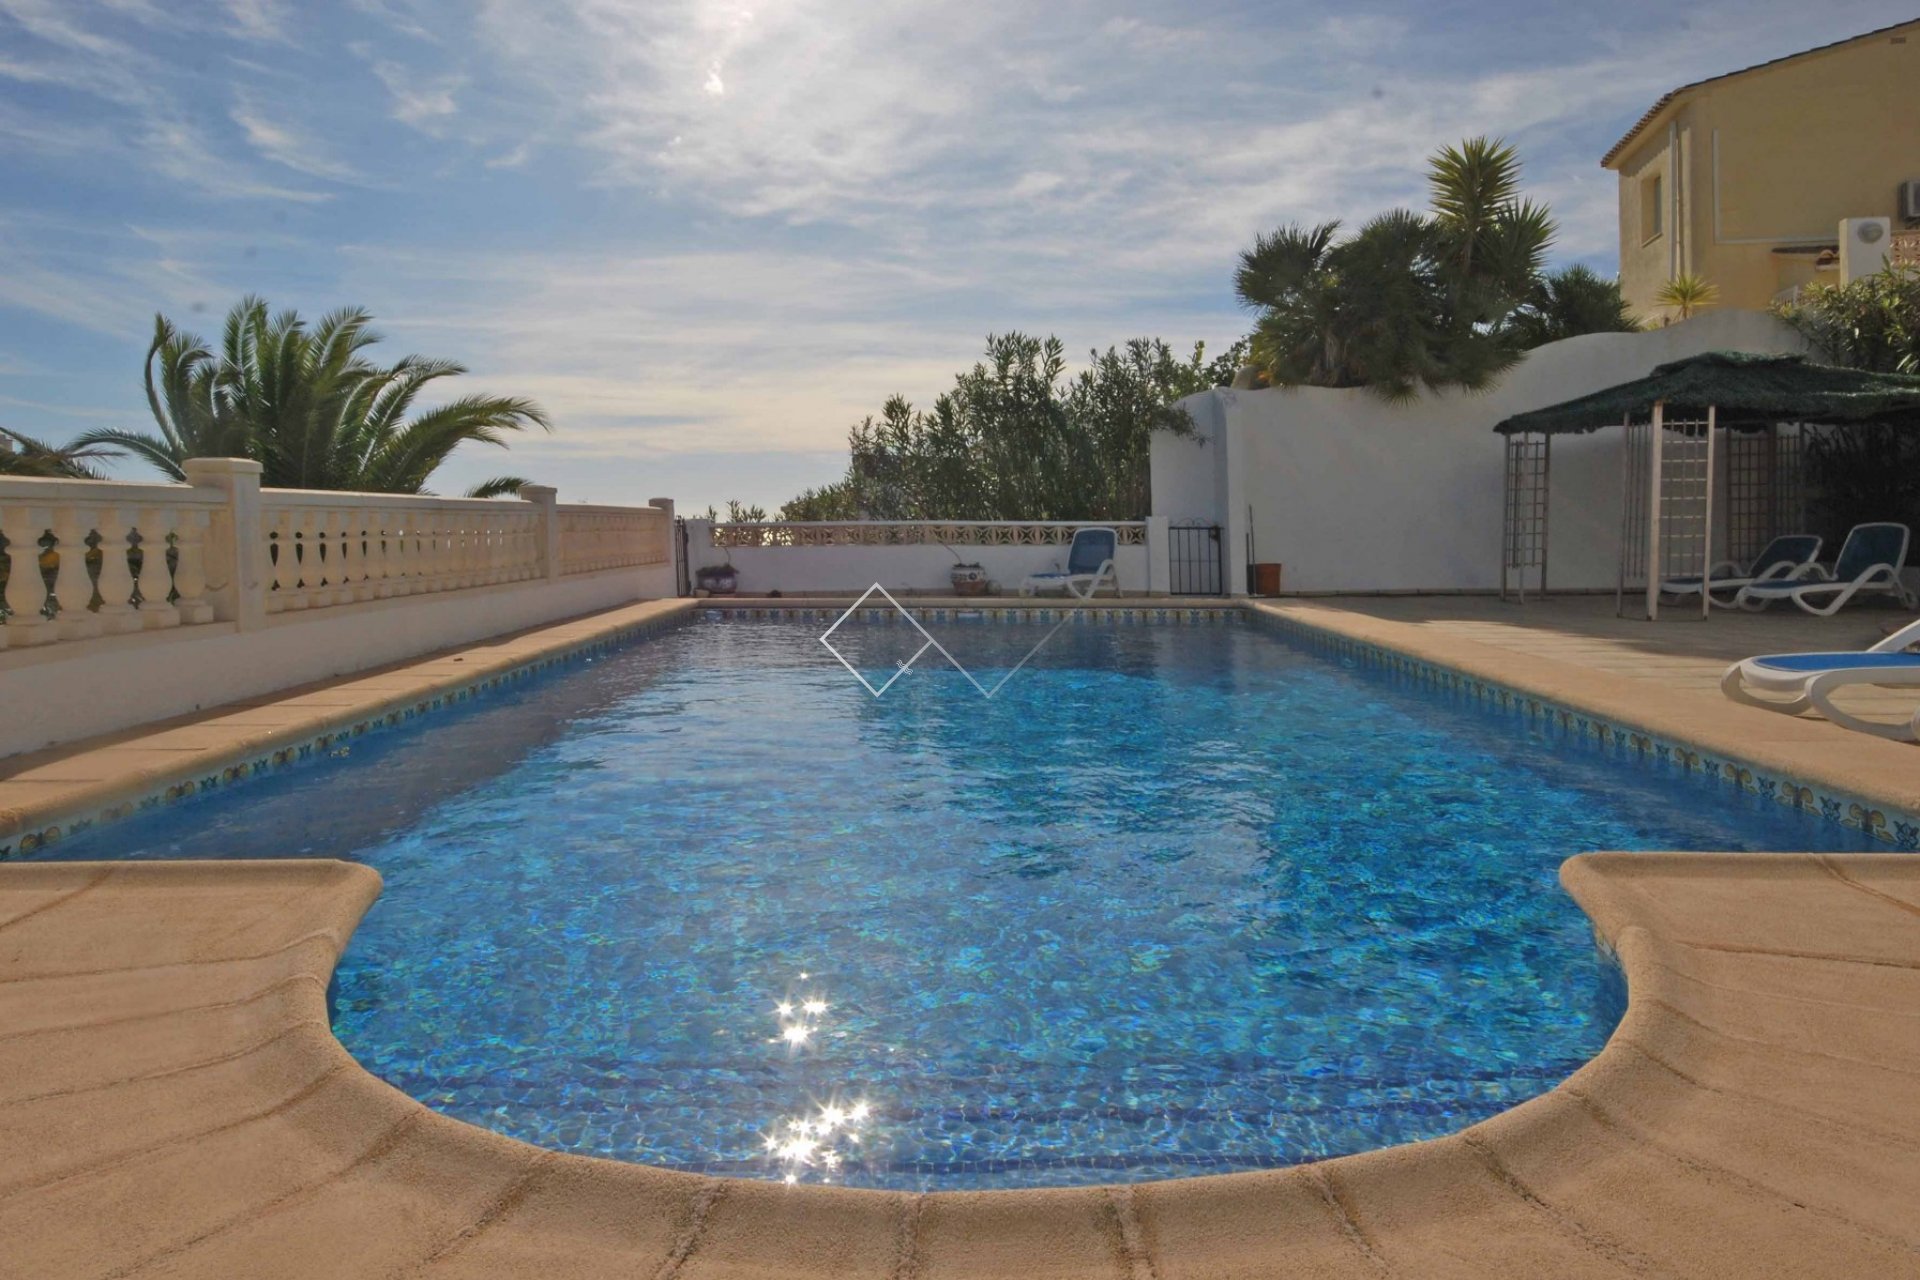 Nice pool with terrace - Detached villa with sea views in Benitachell